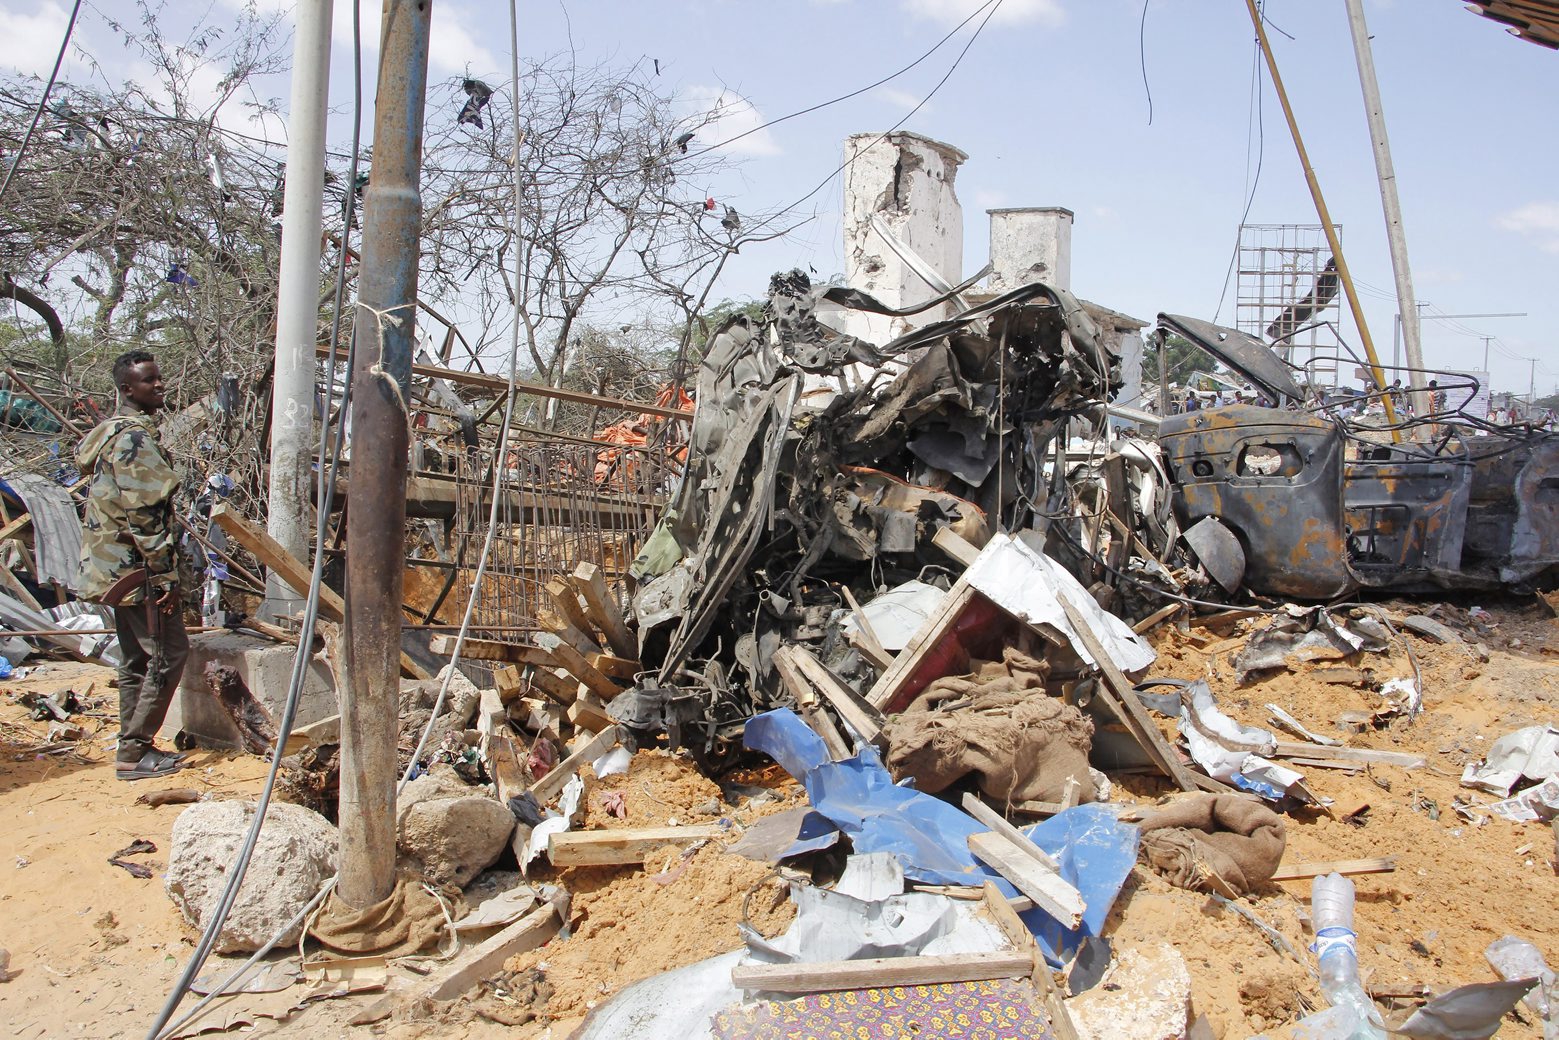 A soldier stands guard near wreckage of vehicles in Mogadishu after a car bomb in Mogadishu, Somalia, Saturday, Dec. 28, 2019. A truck bomb exploded at a busy security checkpoint in Somalia's capital Saturday morning, authorities said. It was one of the deadliest attacks in Mogadishu in recent memory. (AP Photo/Farah Abdi Warsame) Somalia Blast